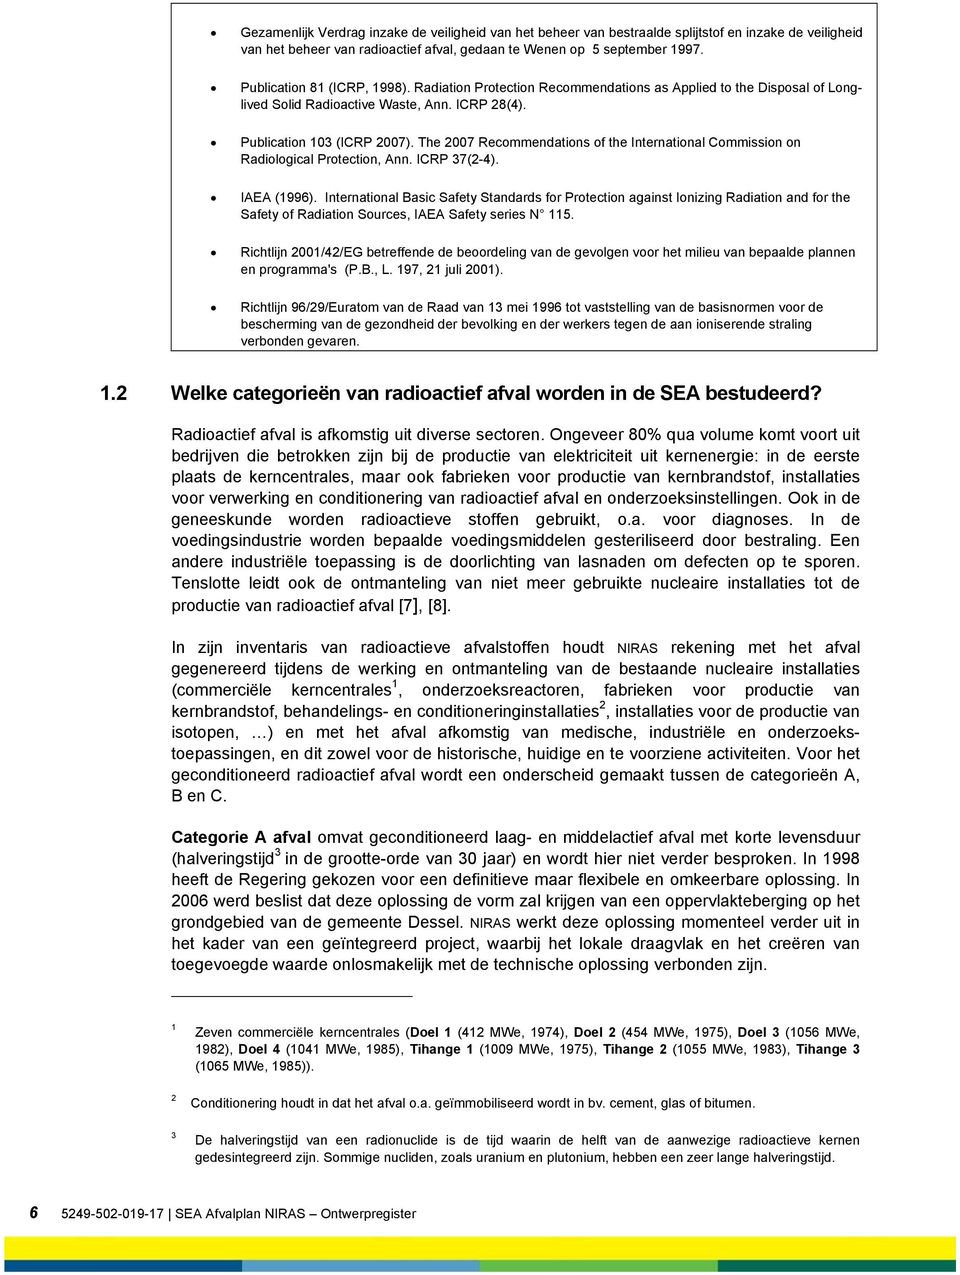 The 2007 Recommendations of the International Commission on Radiological Protection, Ann. ICRP 37(2-4). IAEA (1996).